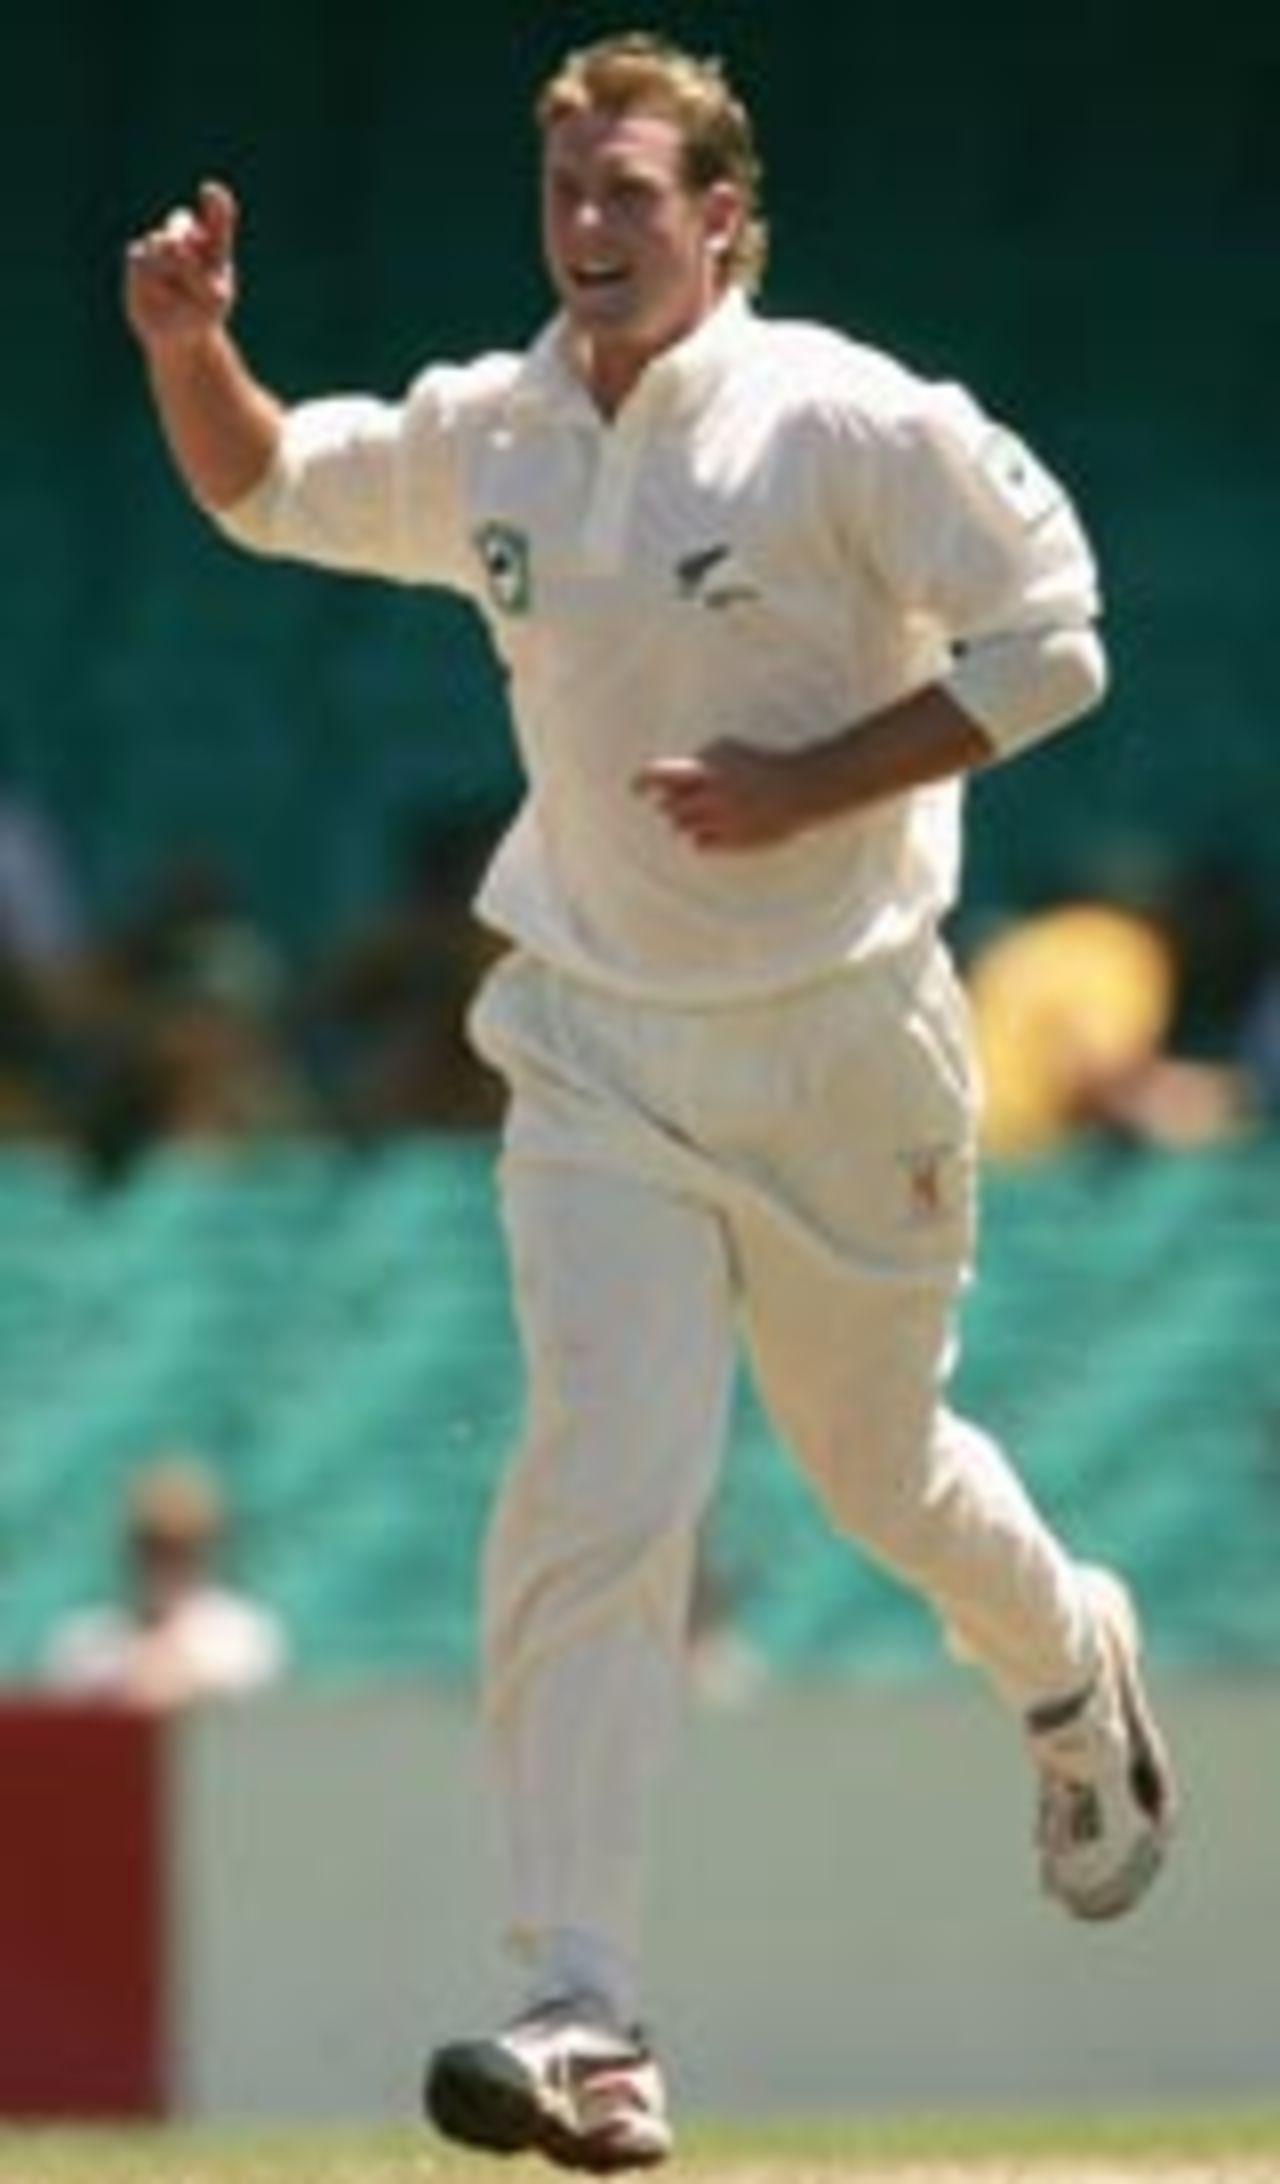 Ian Butler celebrates after taking a wicket, New South Wales v New Zealand, SCG, November 12 2004